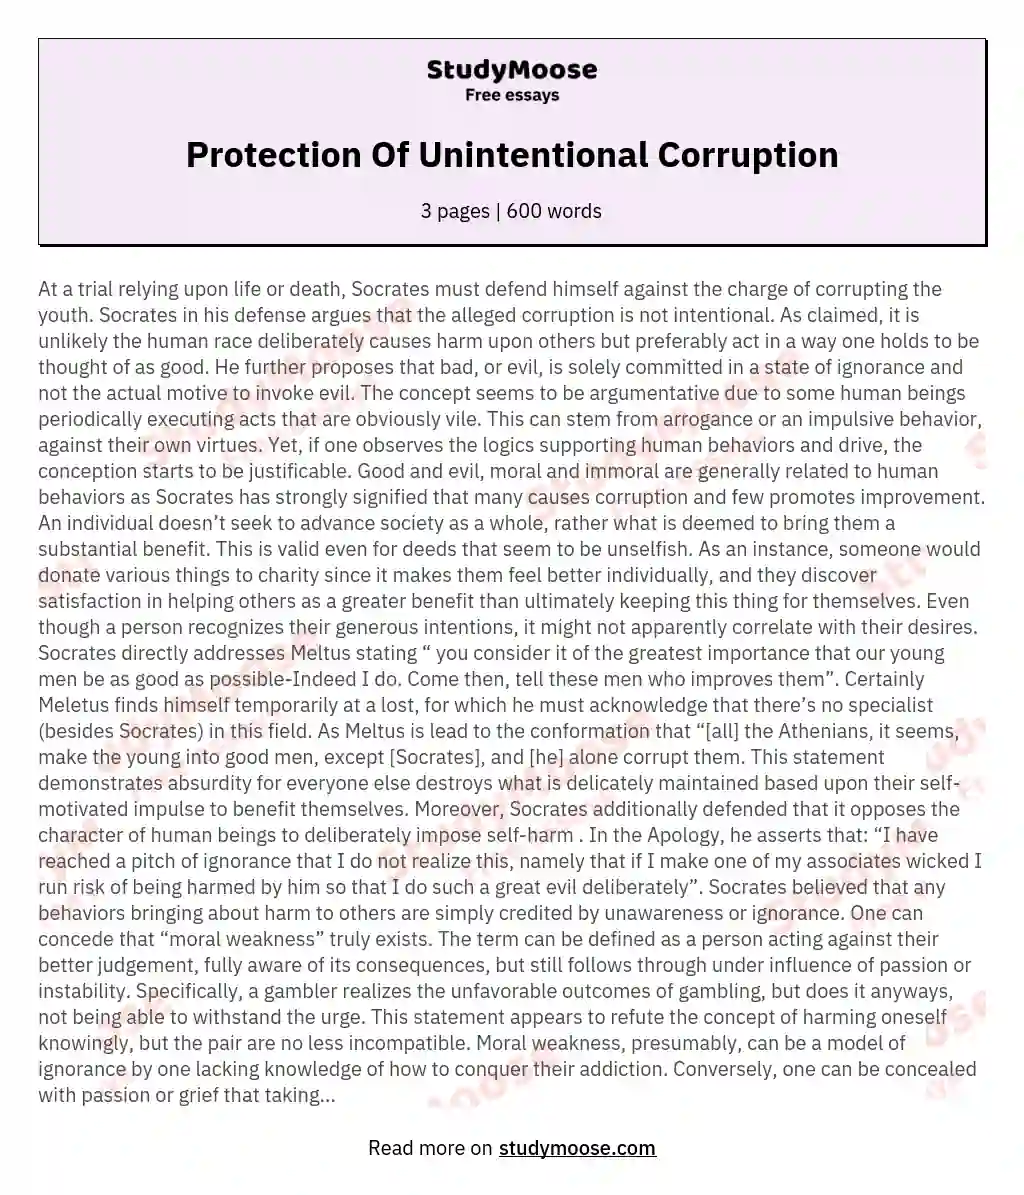 Protection Of Unintentional Corruption essay